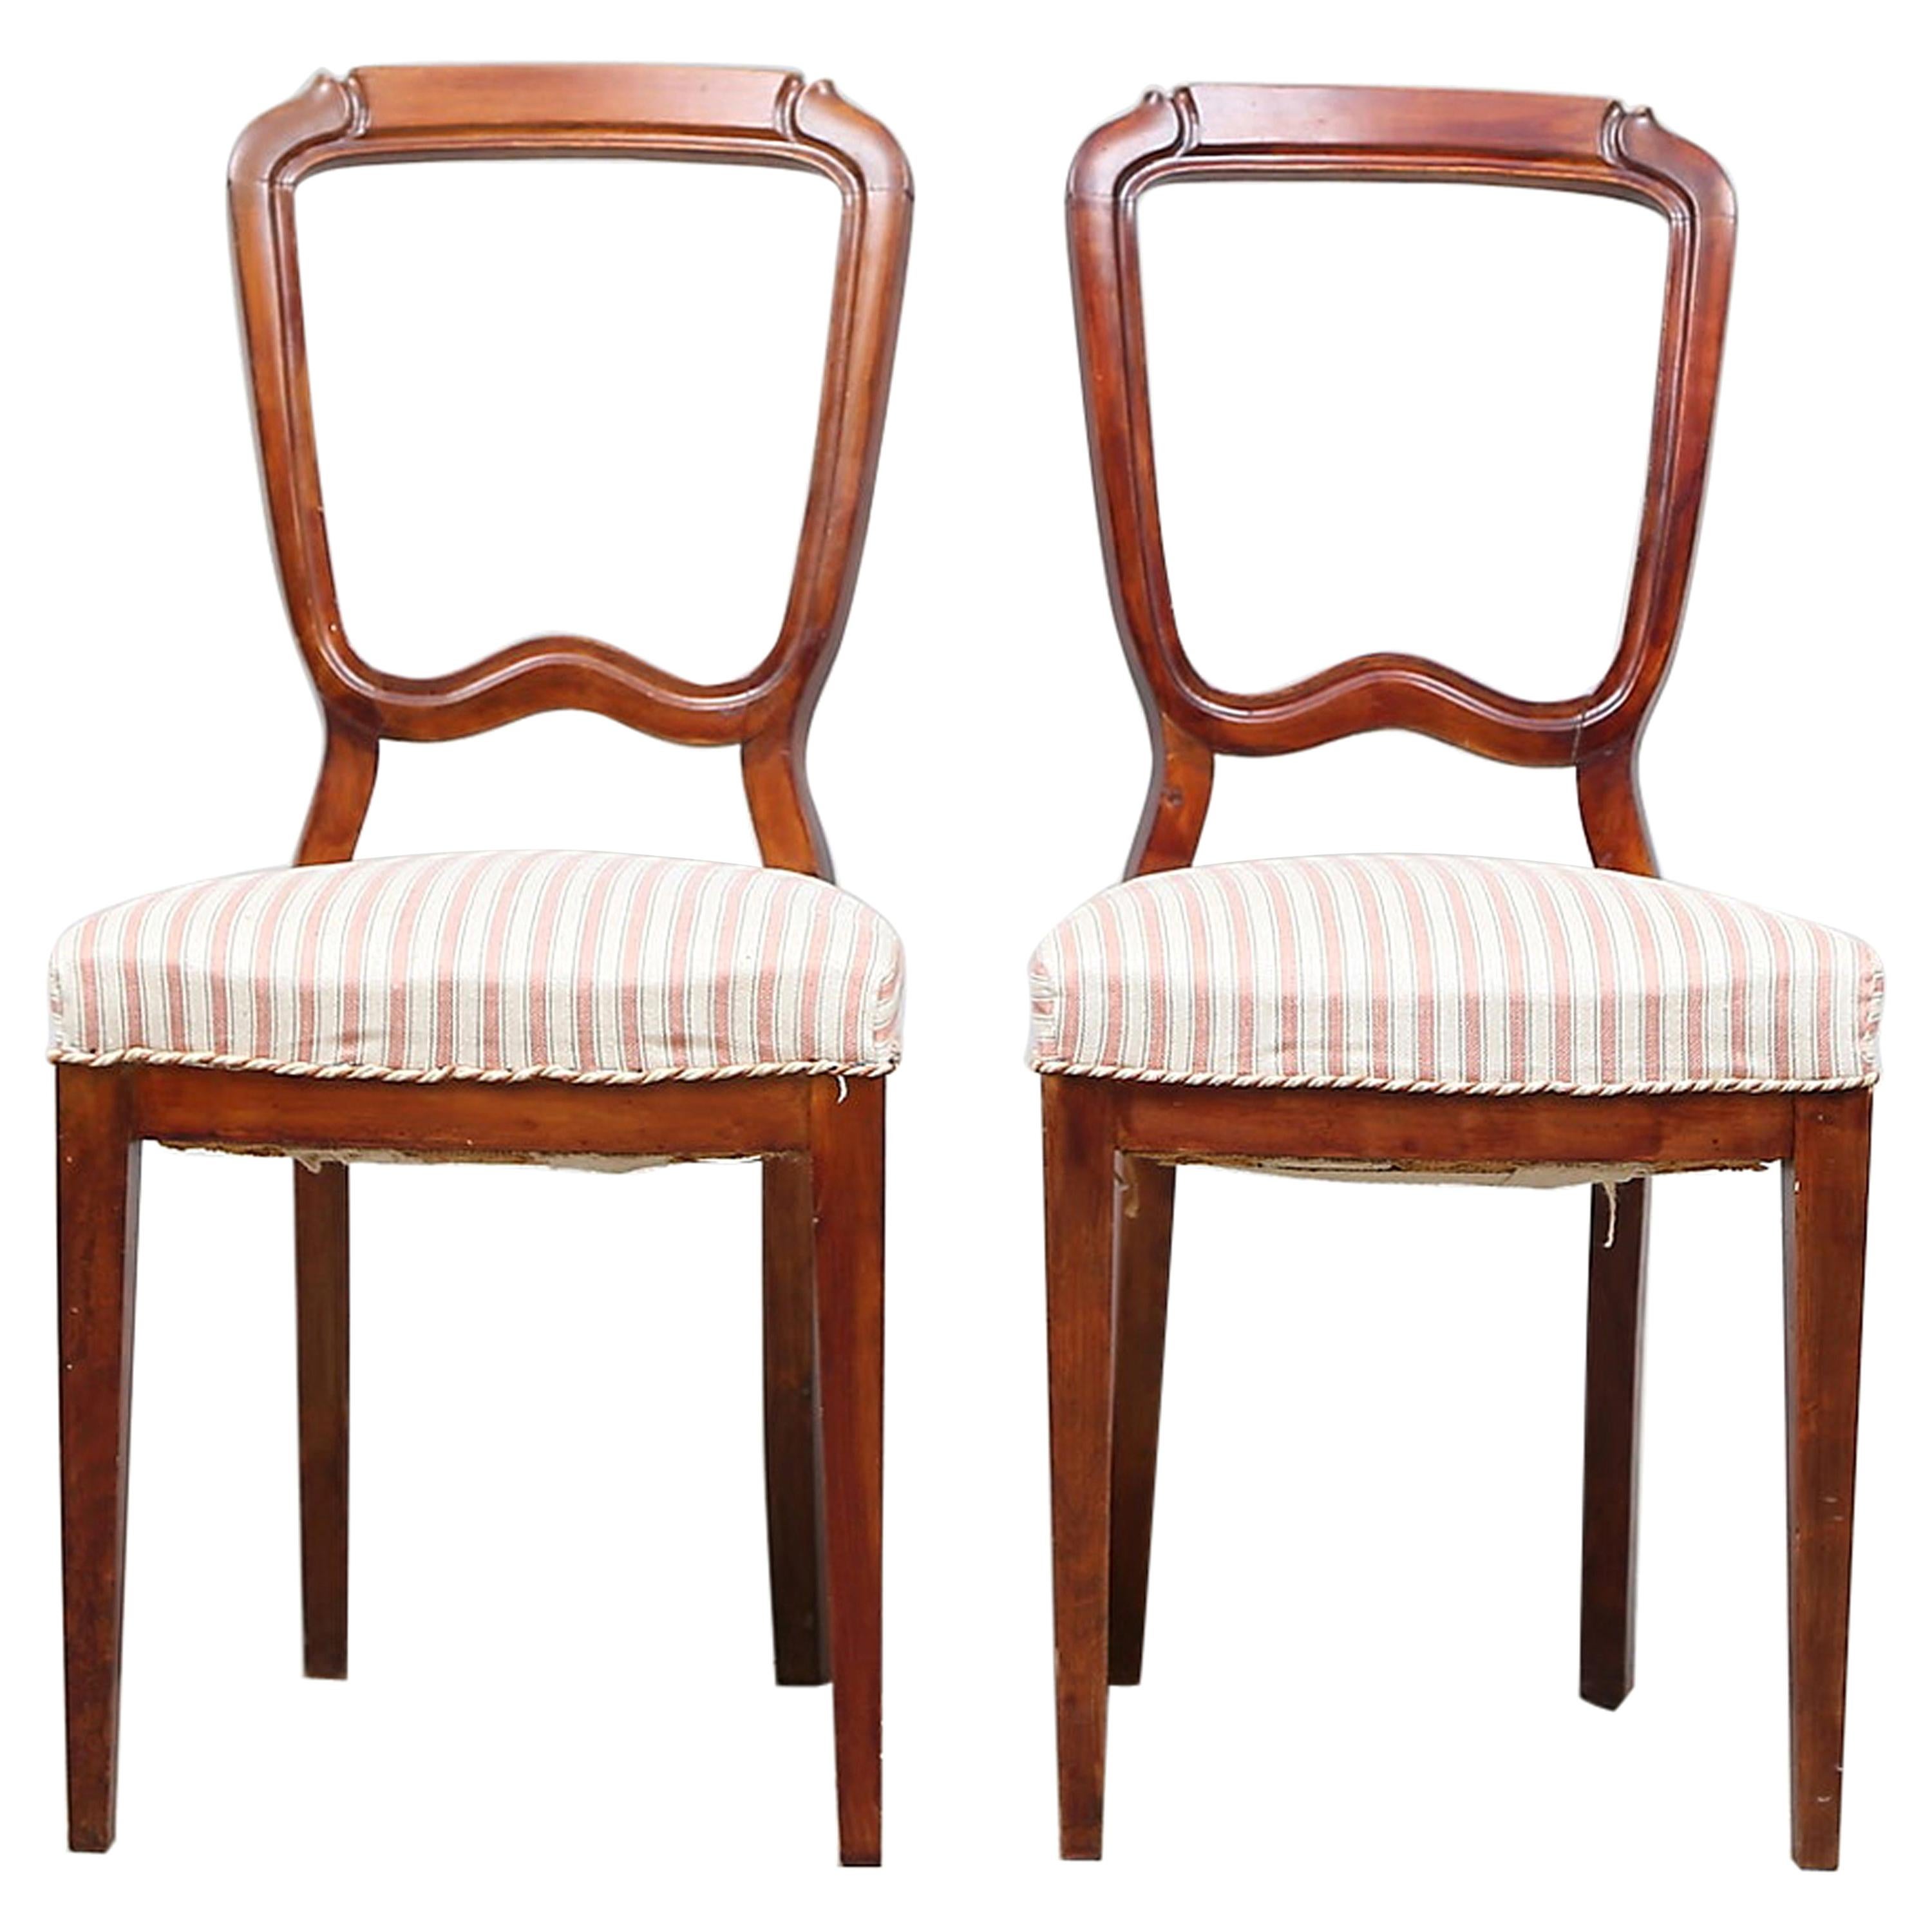 1800s Period Pair of Dining or Side Chairs